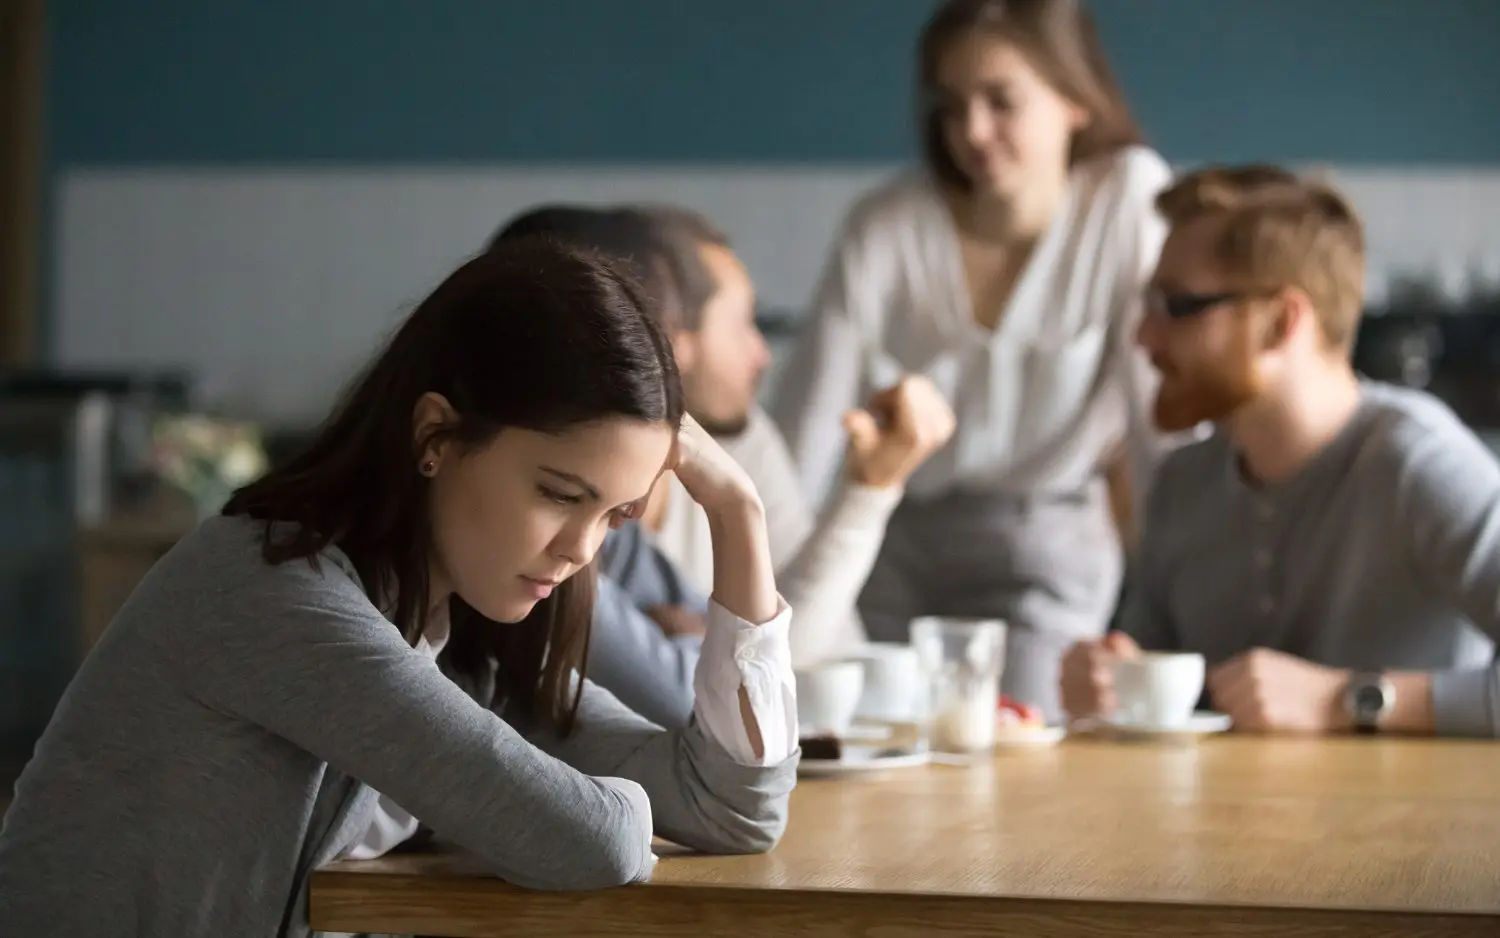 A girl sitting alone with a group of people sitting together out of focus in the background